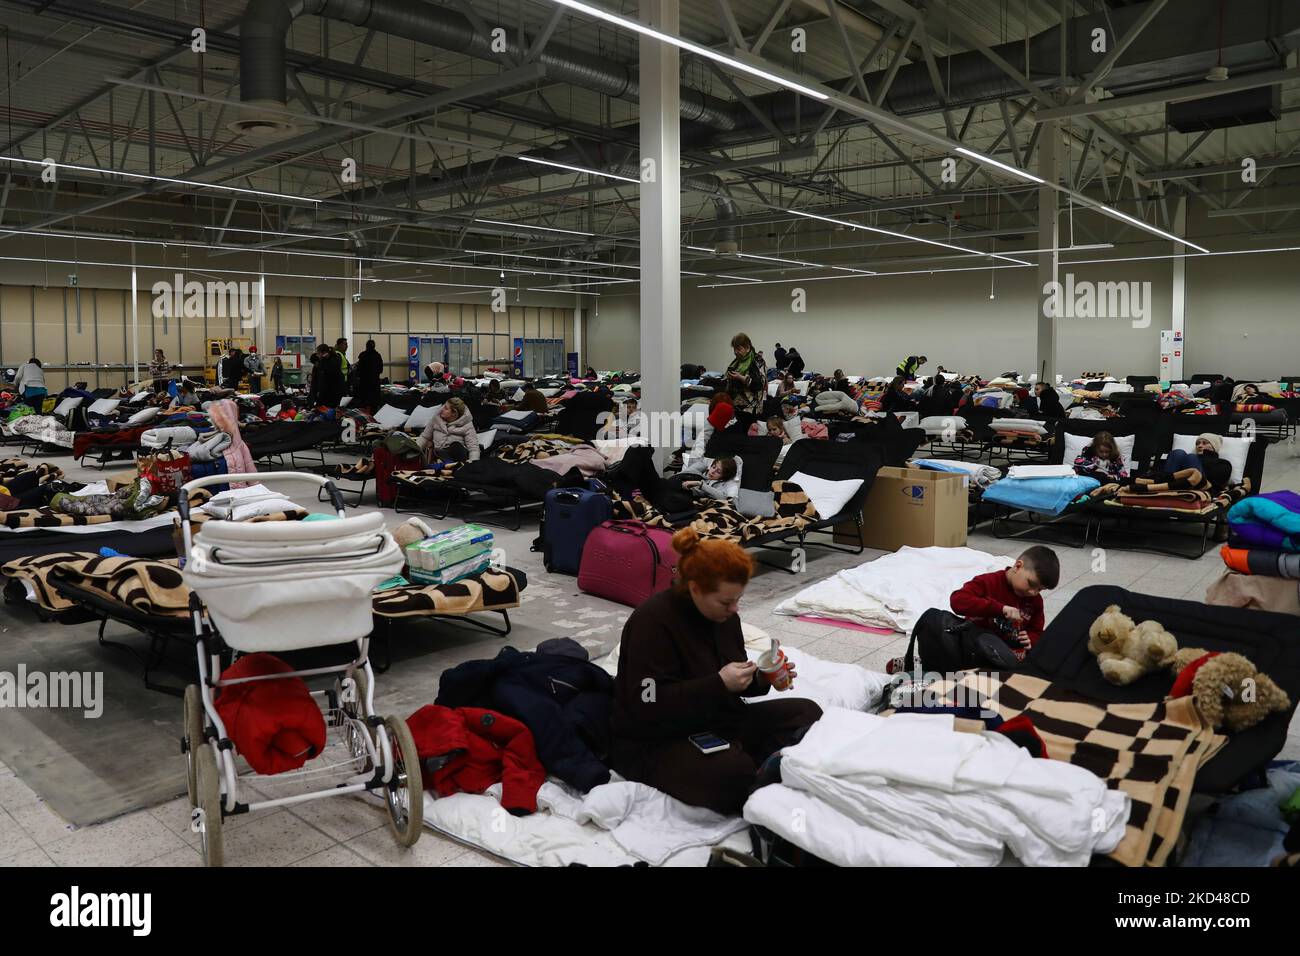 Temporary shelter for people fleeing from Ukraine organised at the former supermarket in Przemysl, Poland on March 5, 2022. Thousands of refugees cross the Ukrainian-Polish border after the Russian invasion. (Photo by Jakub Porzycki/NurPhoto) Stock Photo